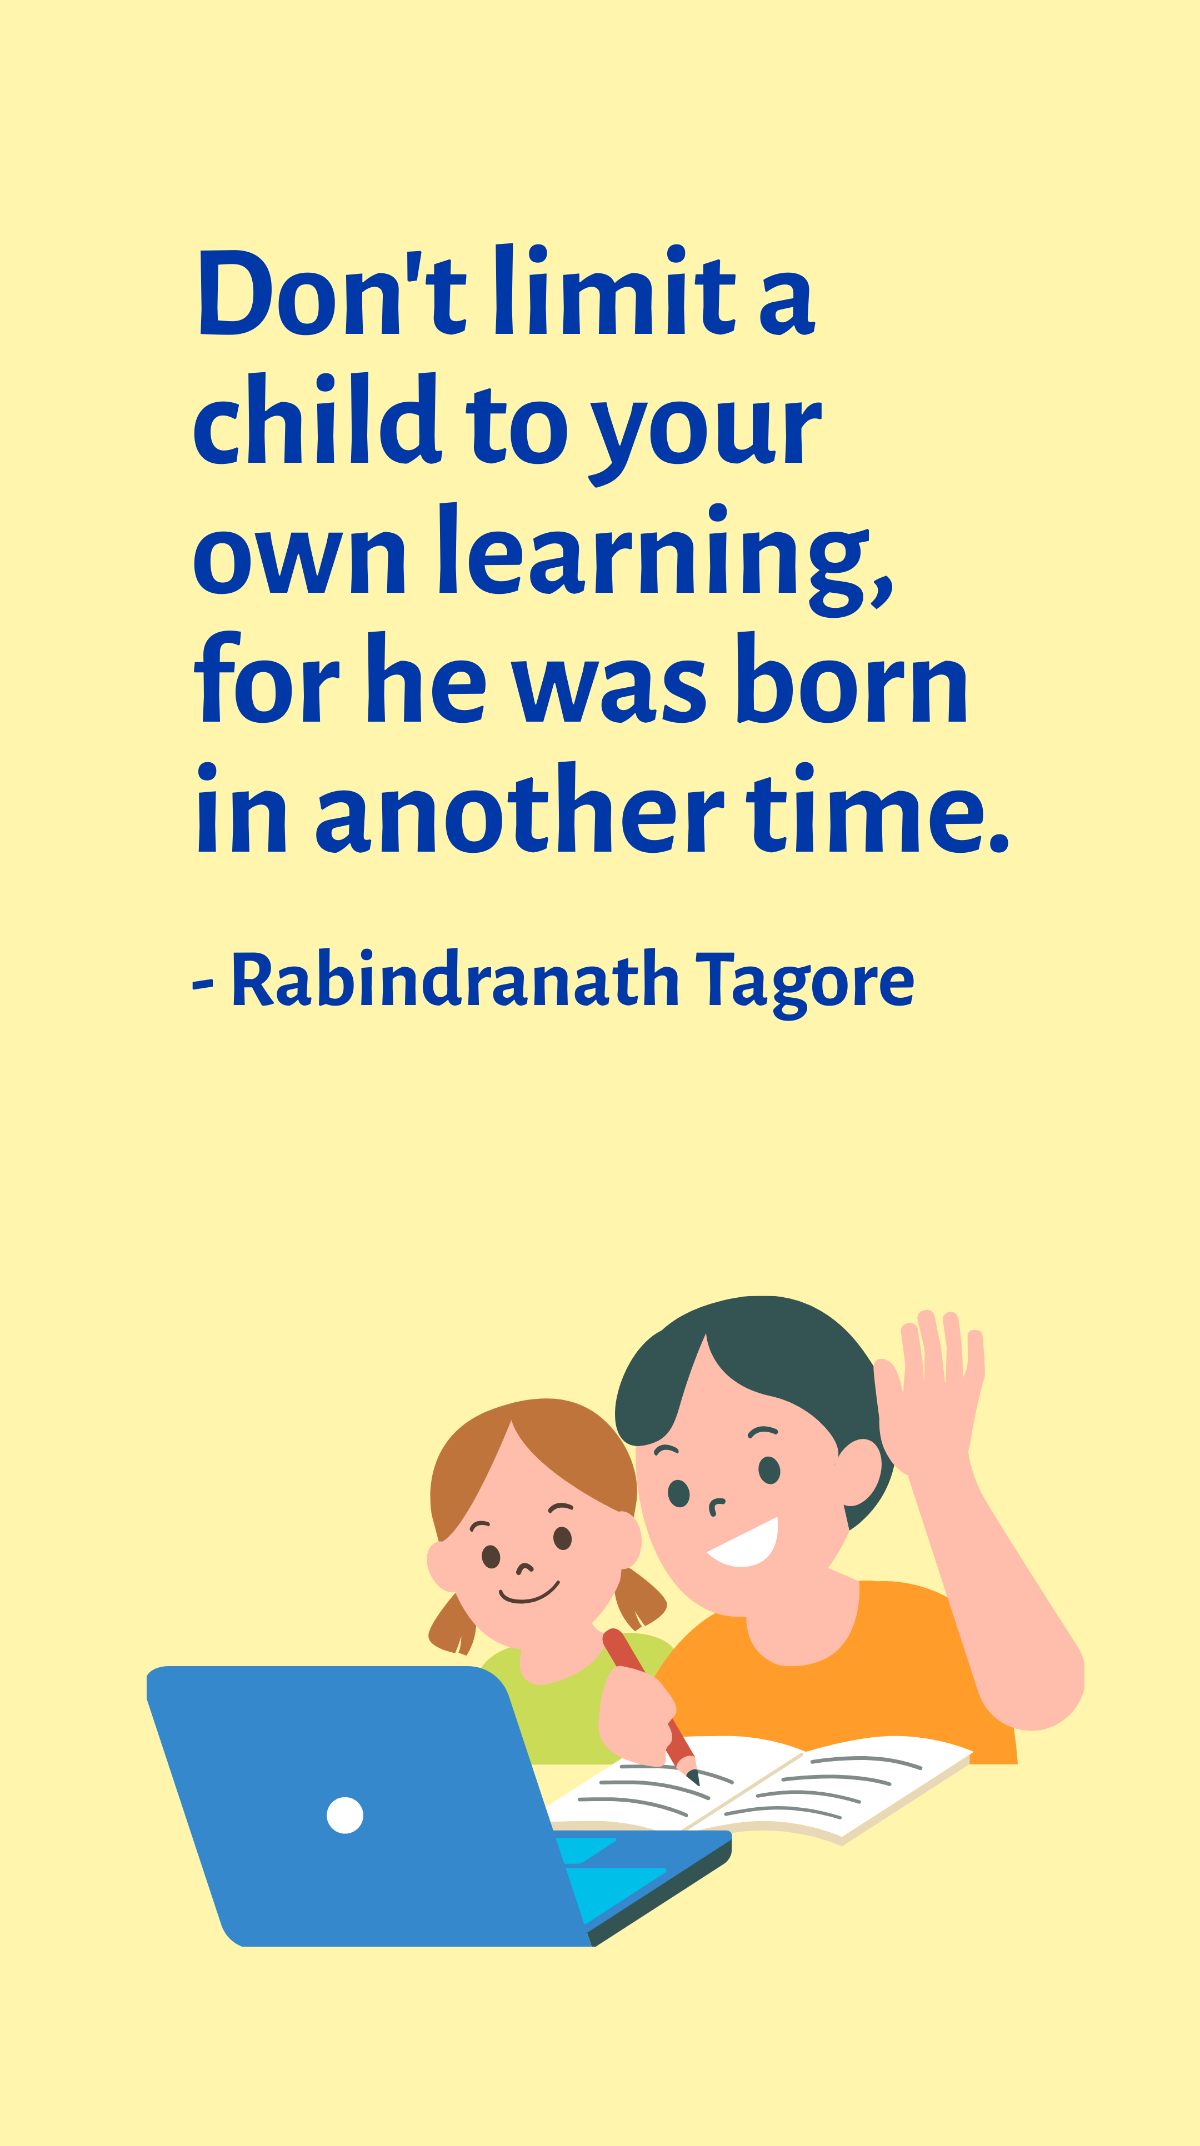 Free Rabindranath Tagore - Don't limit a child to your own learning, for he was born in another time. Template